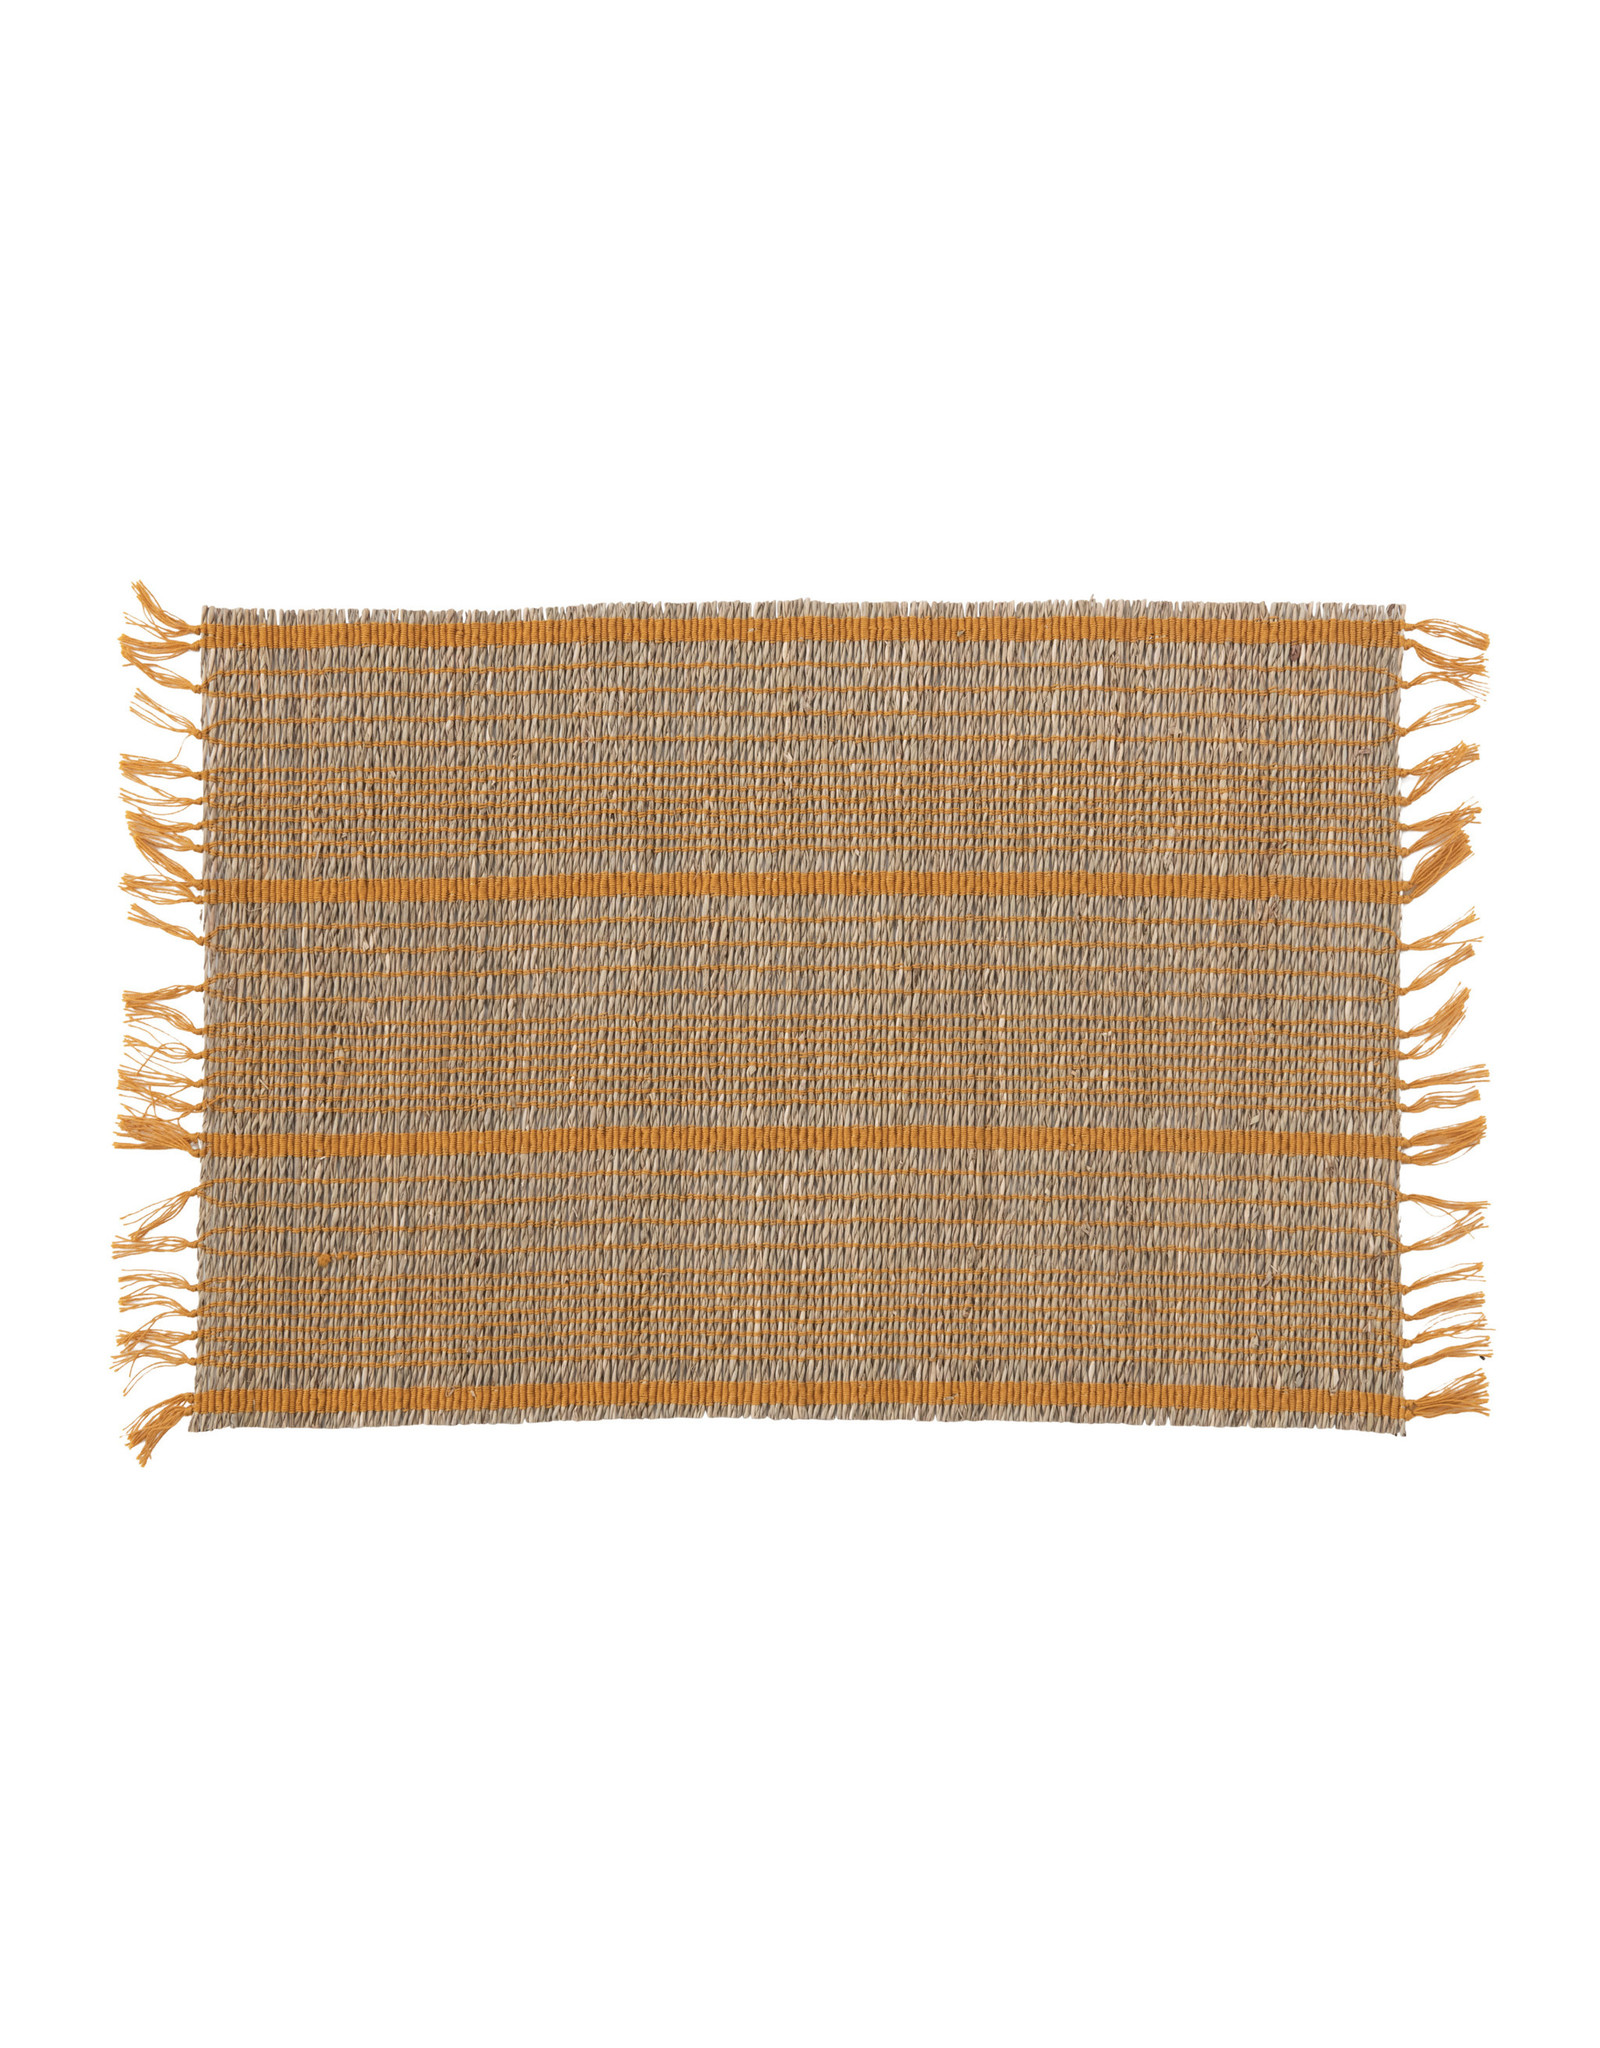 DF6339 Bamboo Placemat with Stripes and Fringe